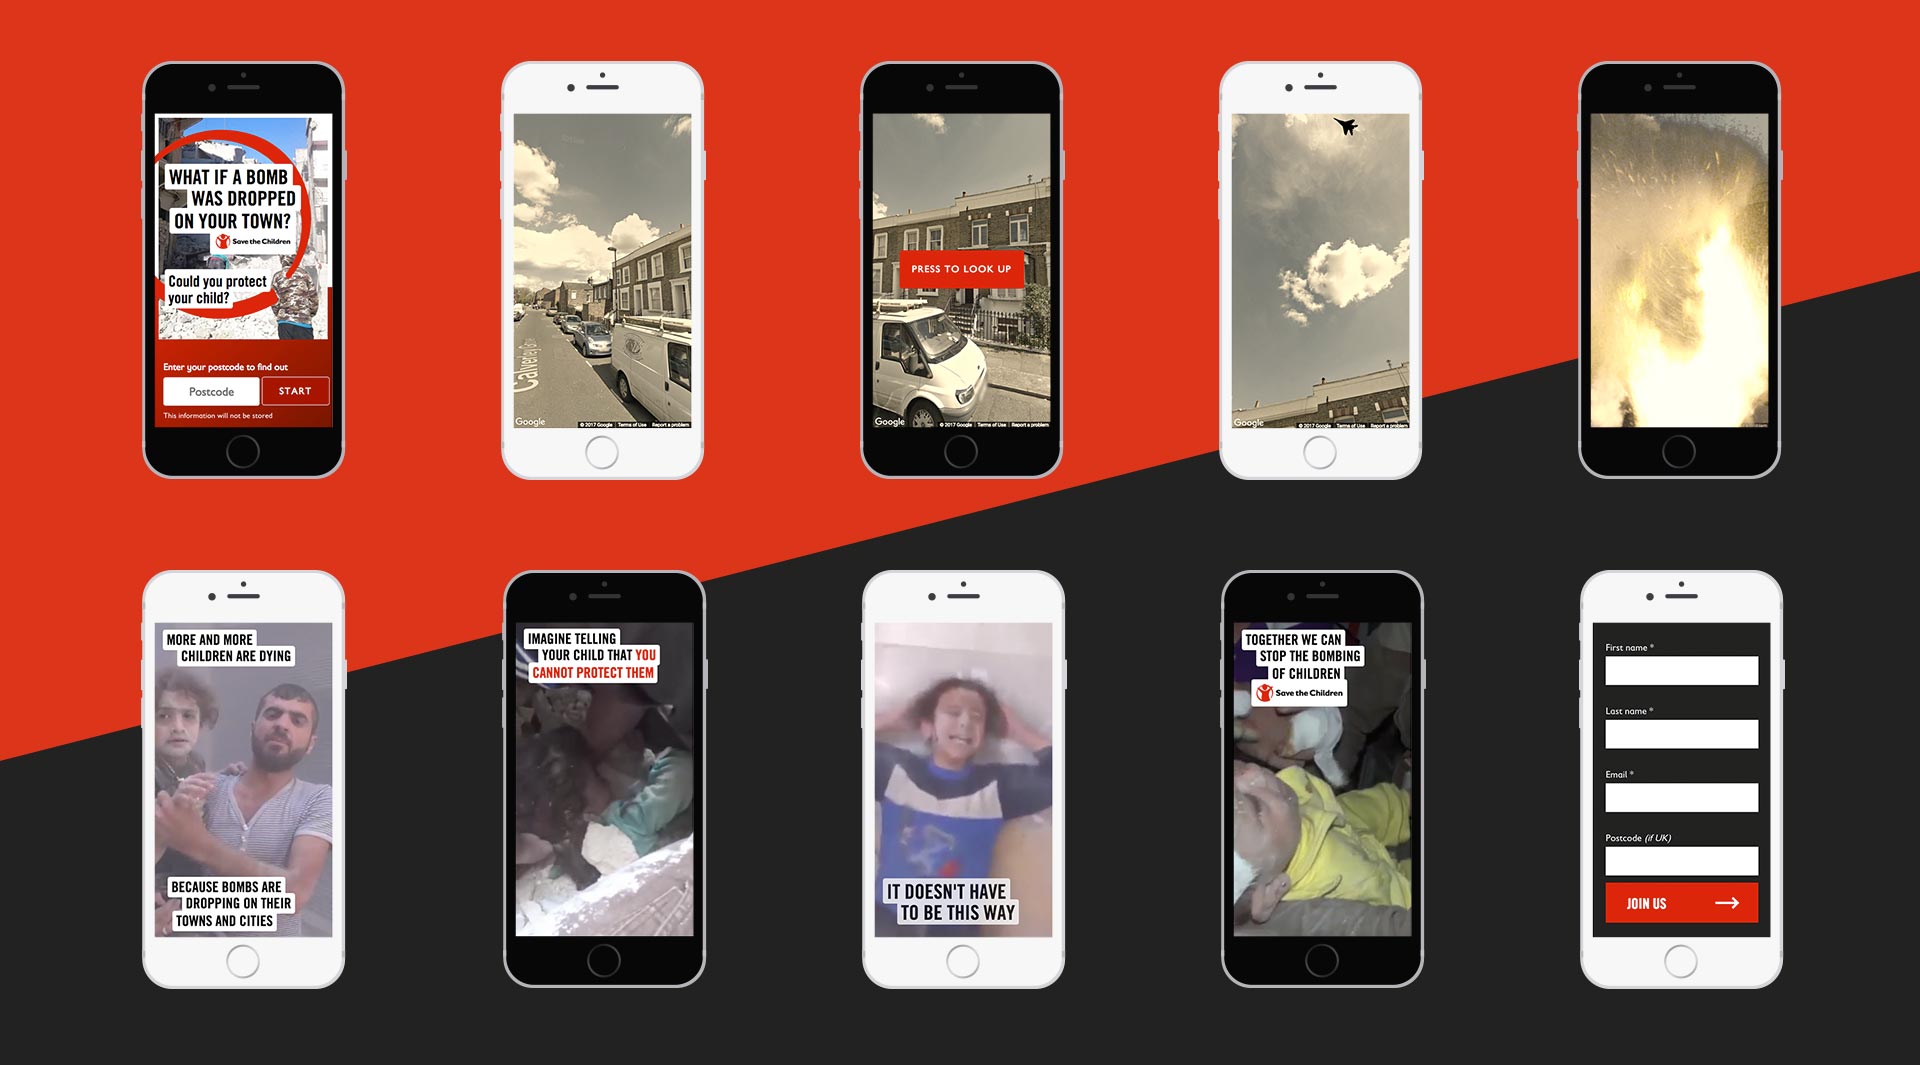 A series of different mockups for the Save the Children tool on mobile